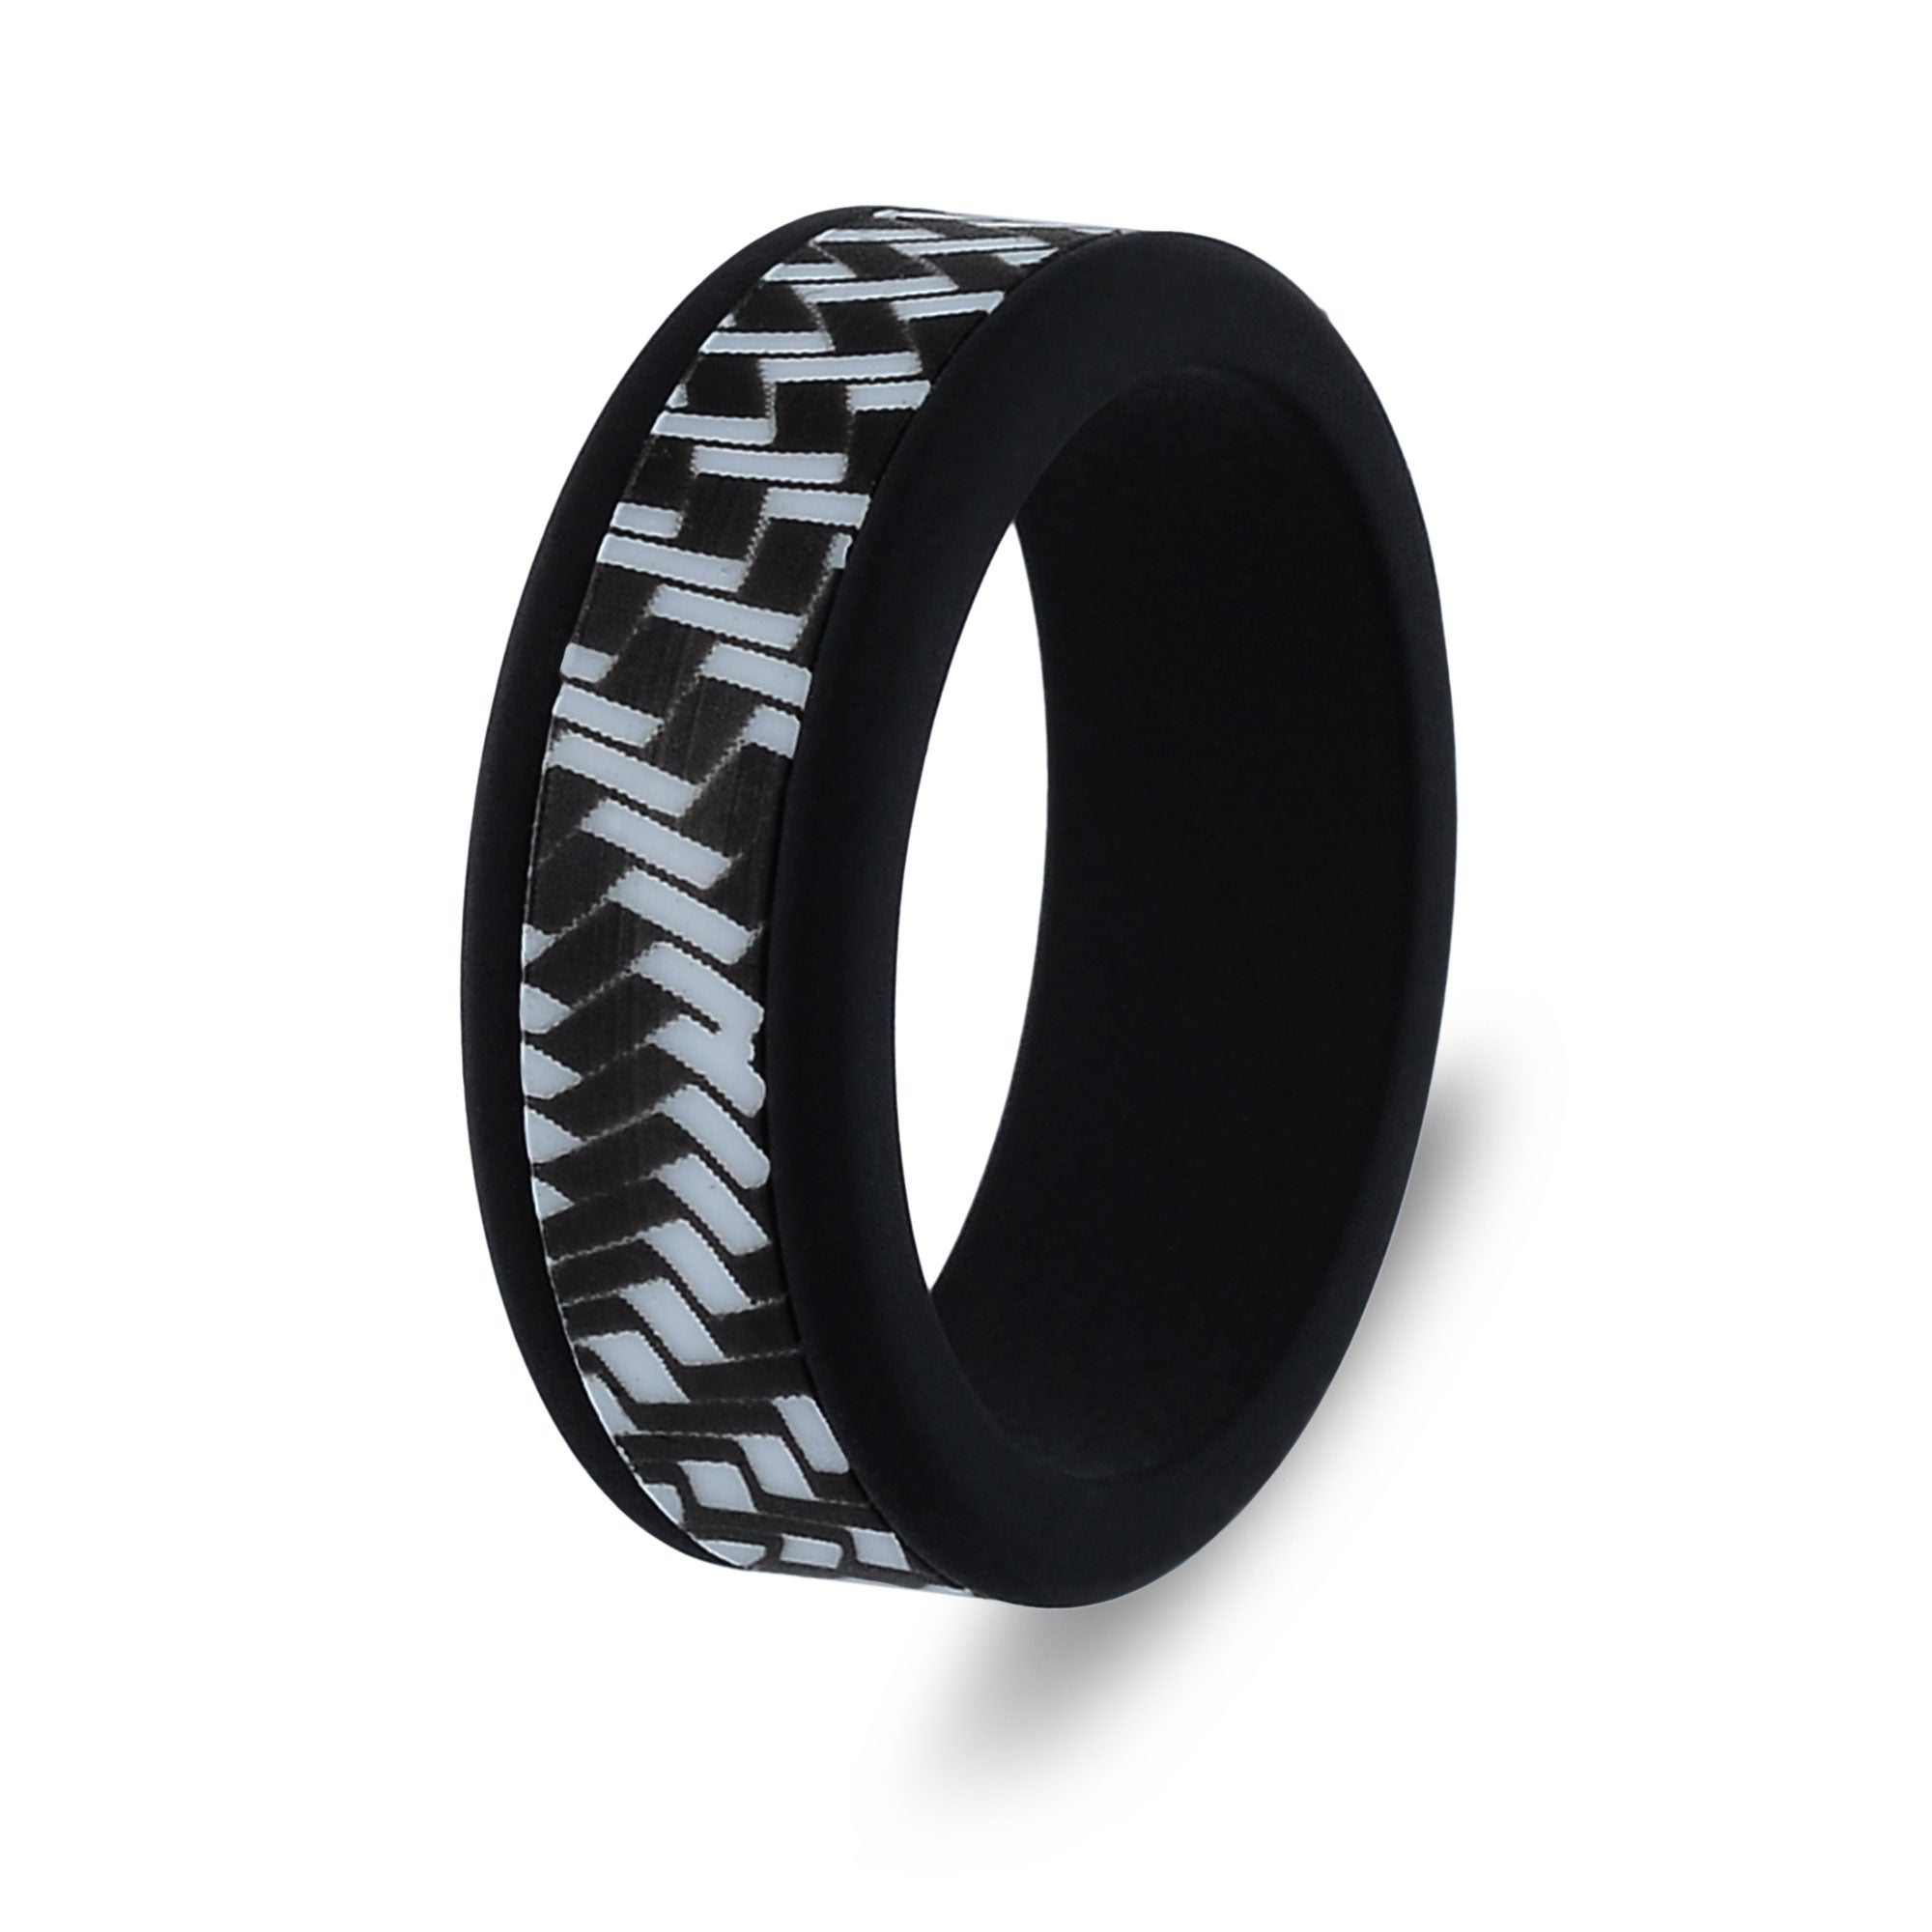 The Checkered - Silicone Ring